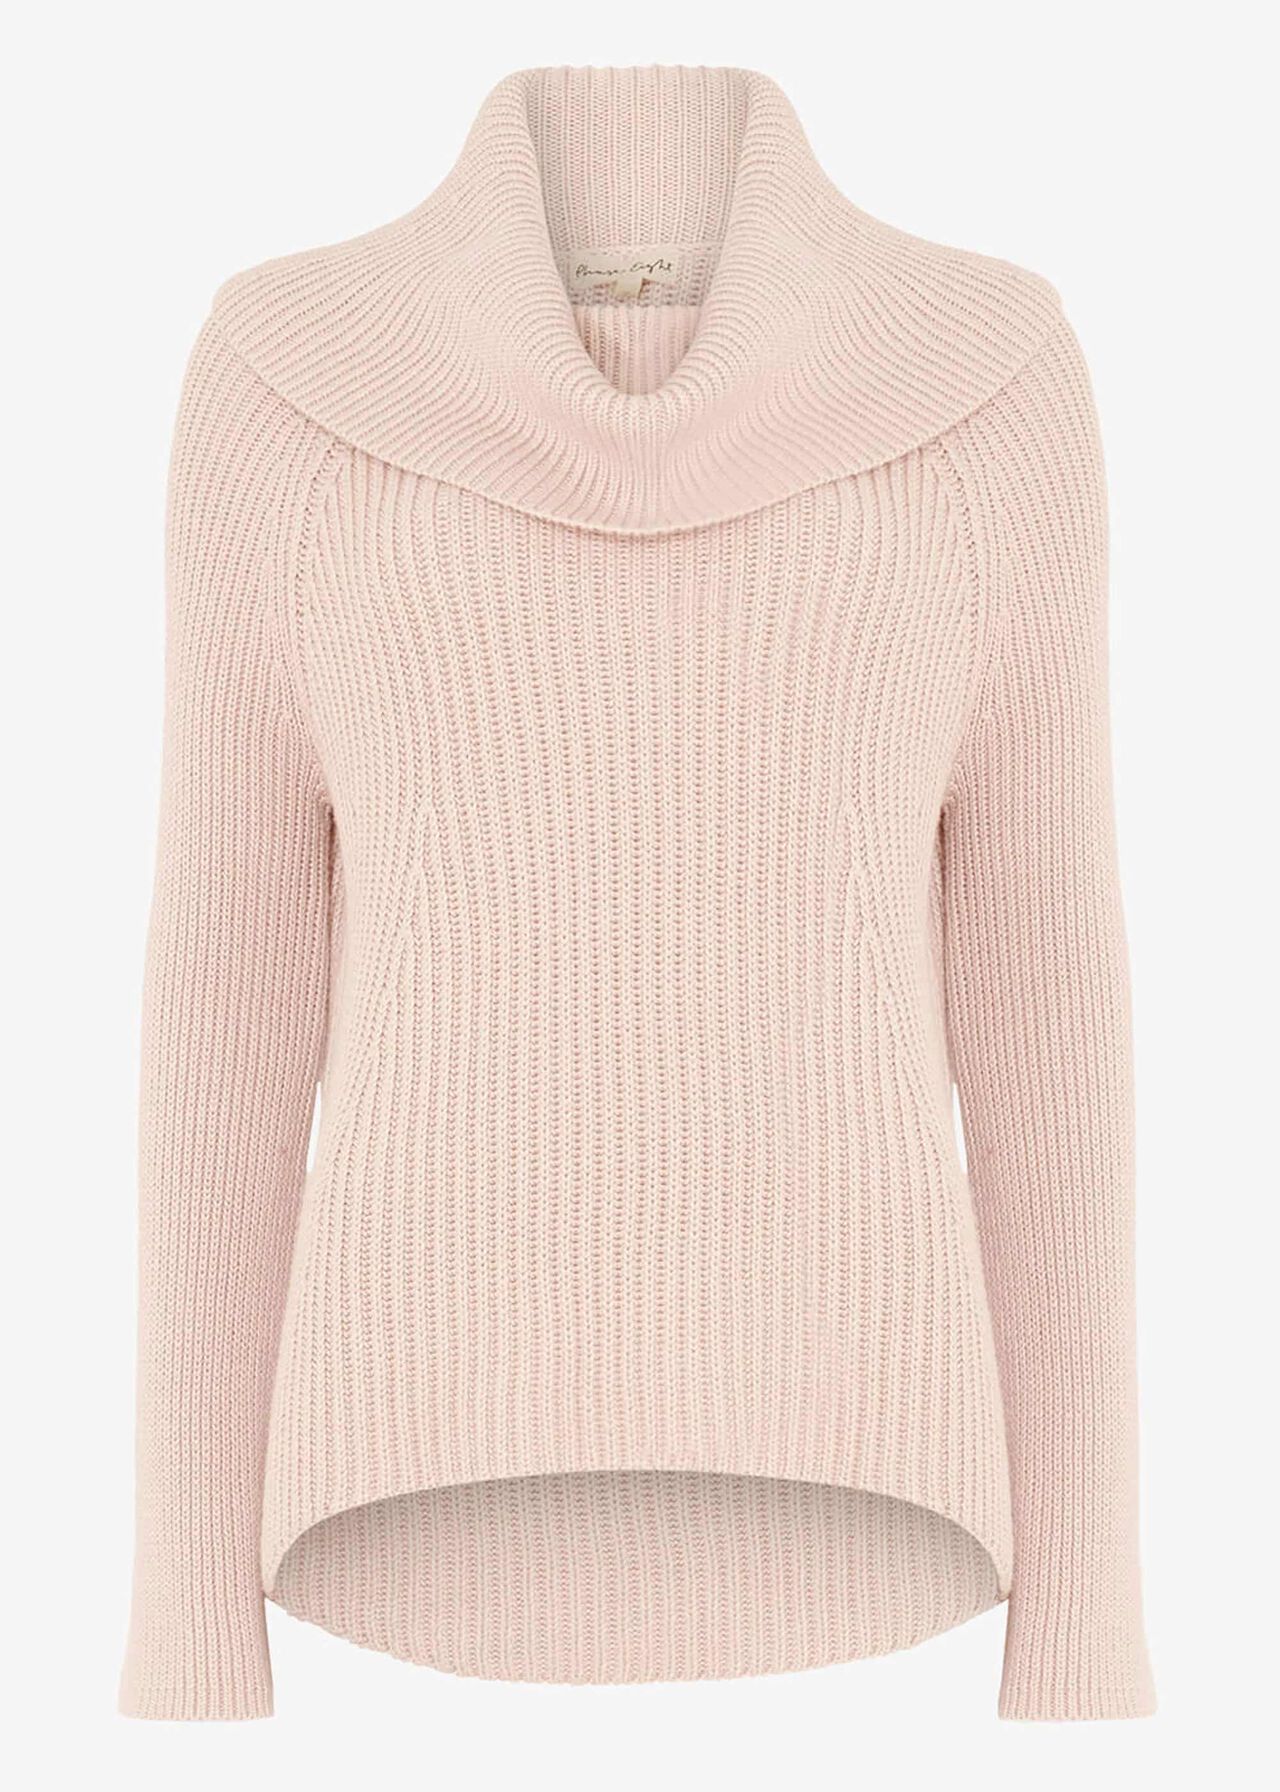 Cateline Cowl Swing Knitted Jumper | Phase Eight